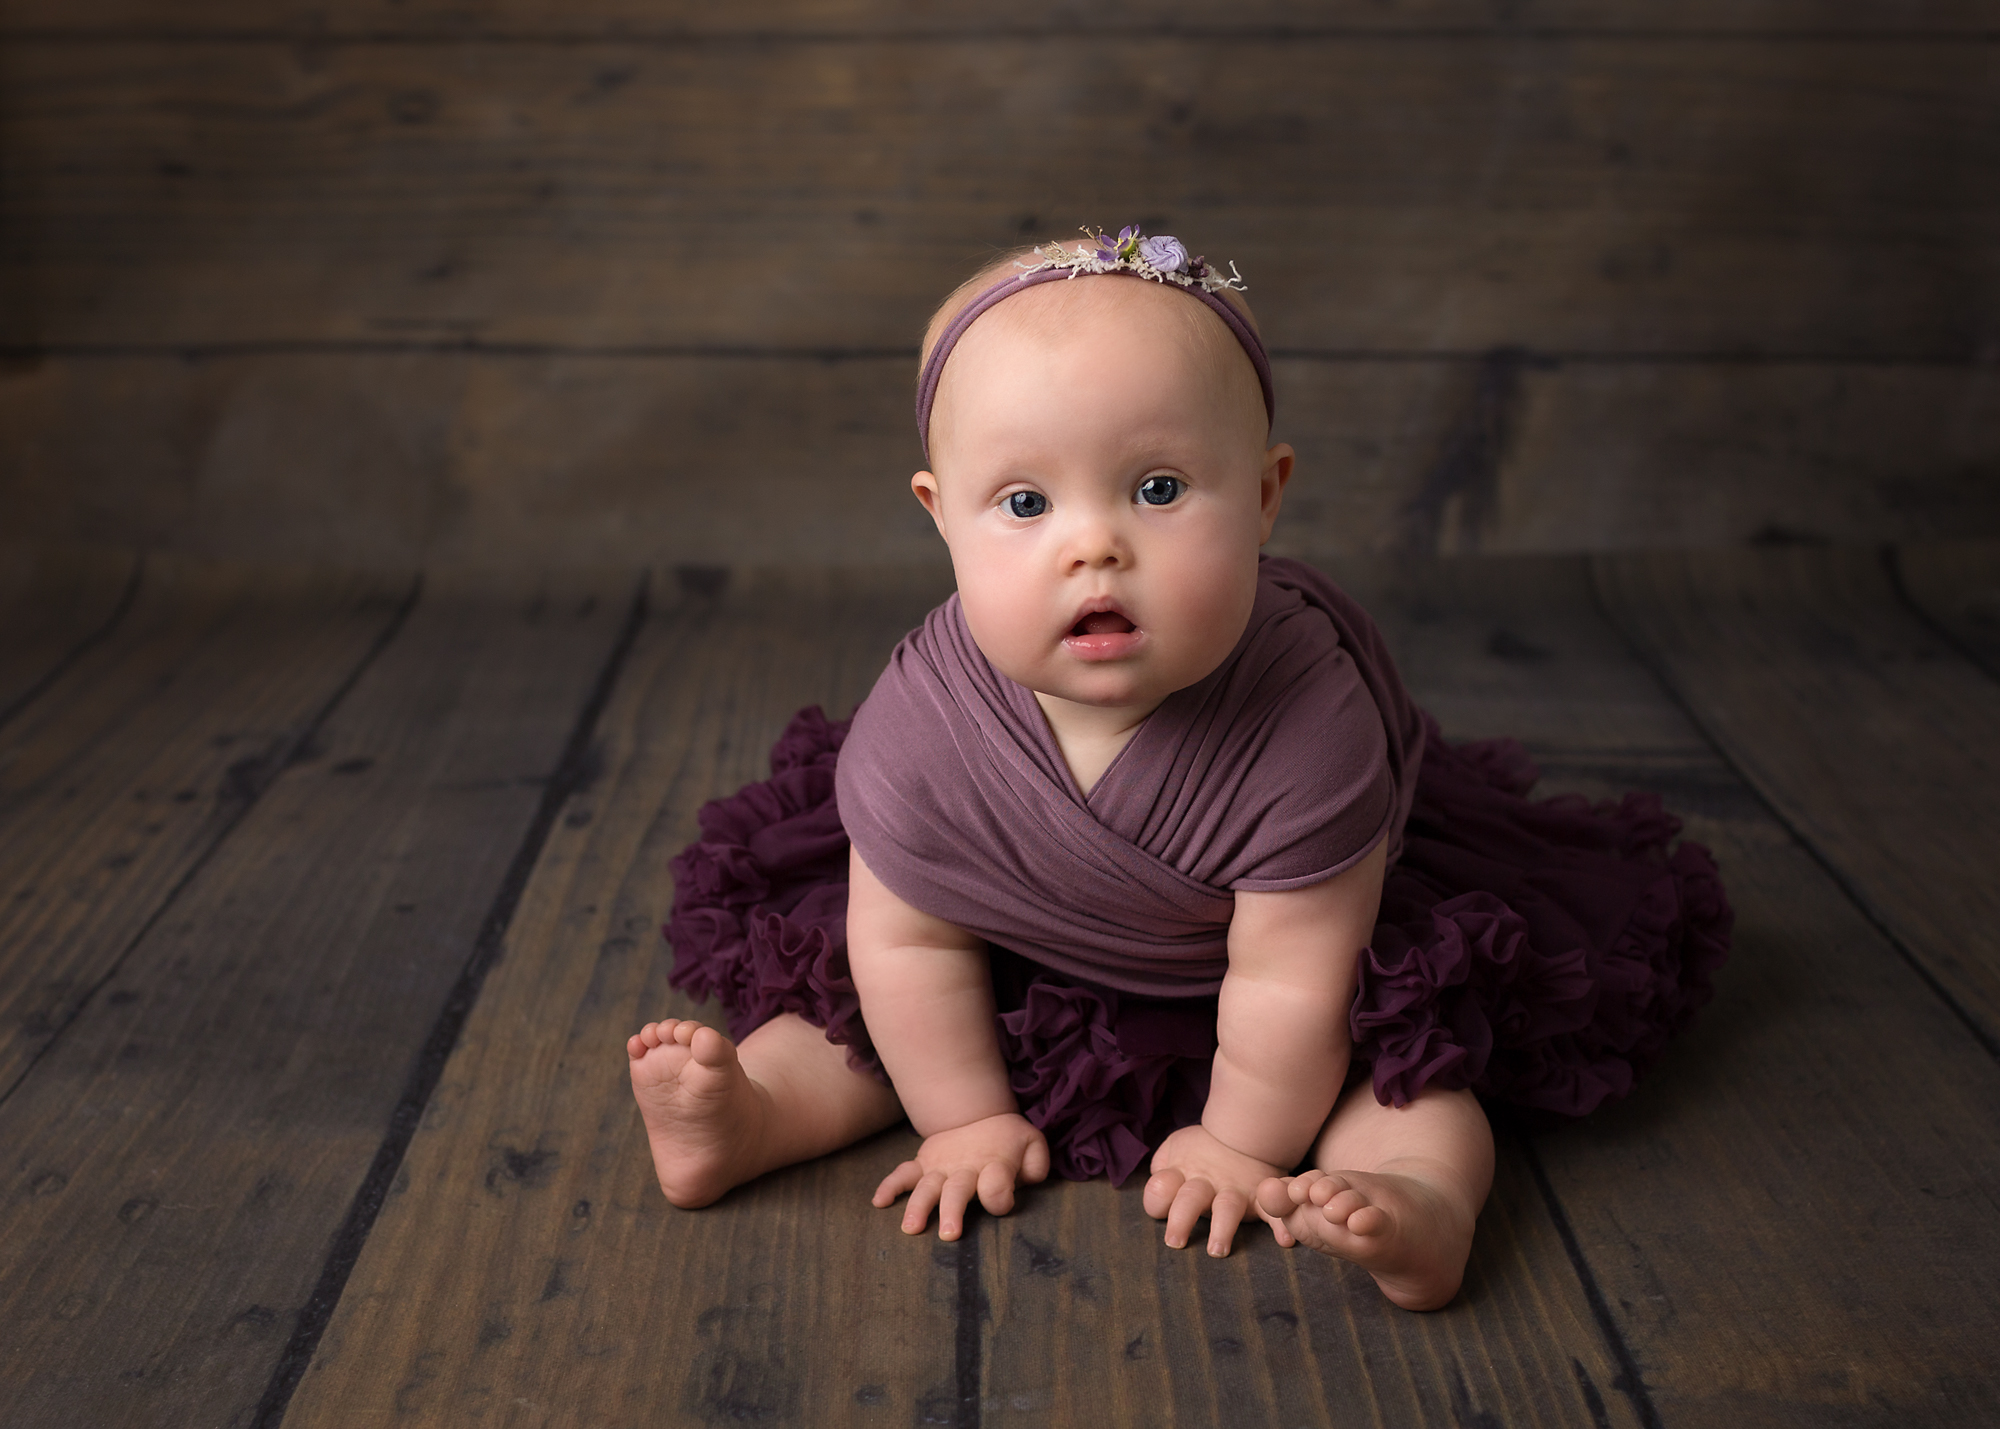 Baby photographer in South Wales, Caerphilly, near Cardiff